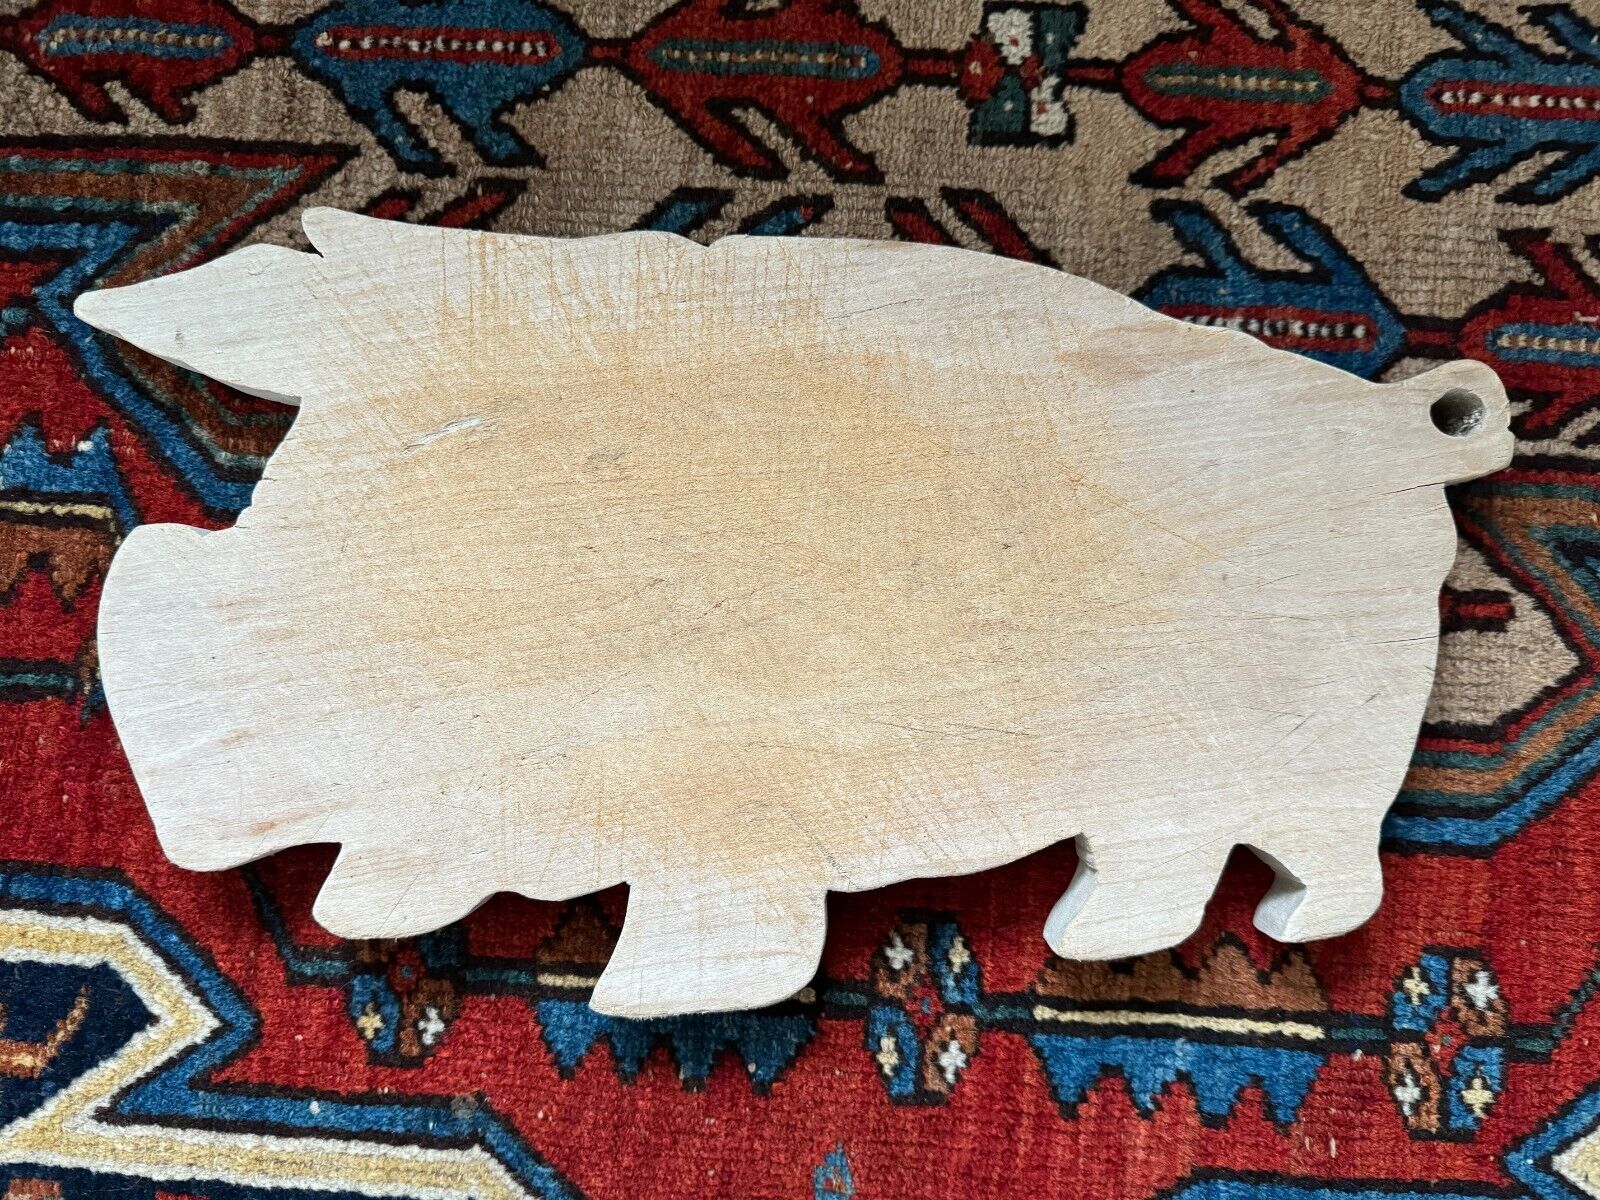 Antique Hand Carved Wooden Country Folk Art Cutting Board - Pig / Animal